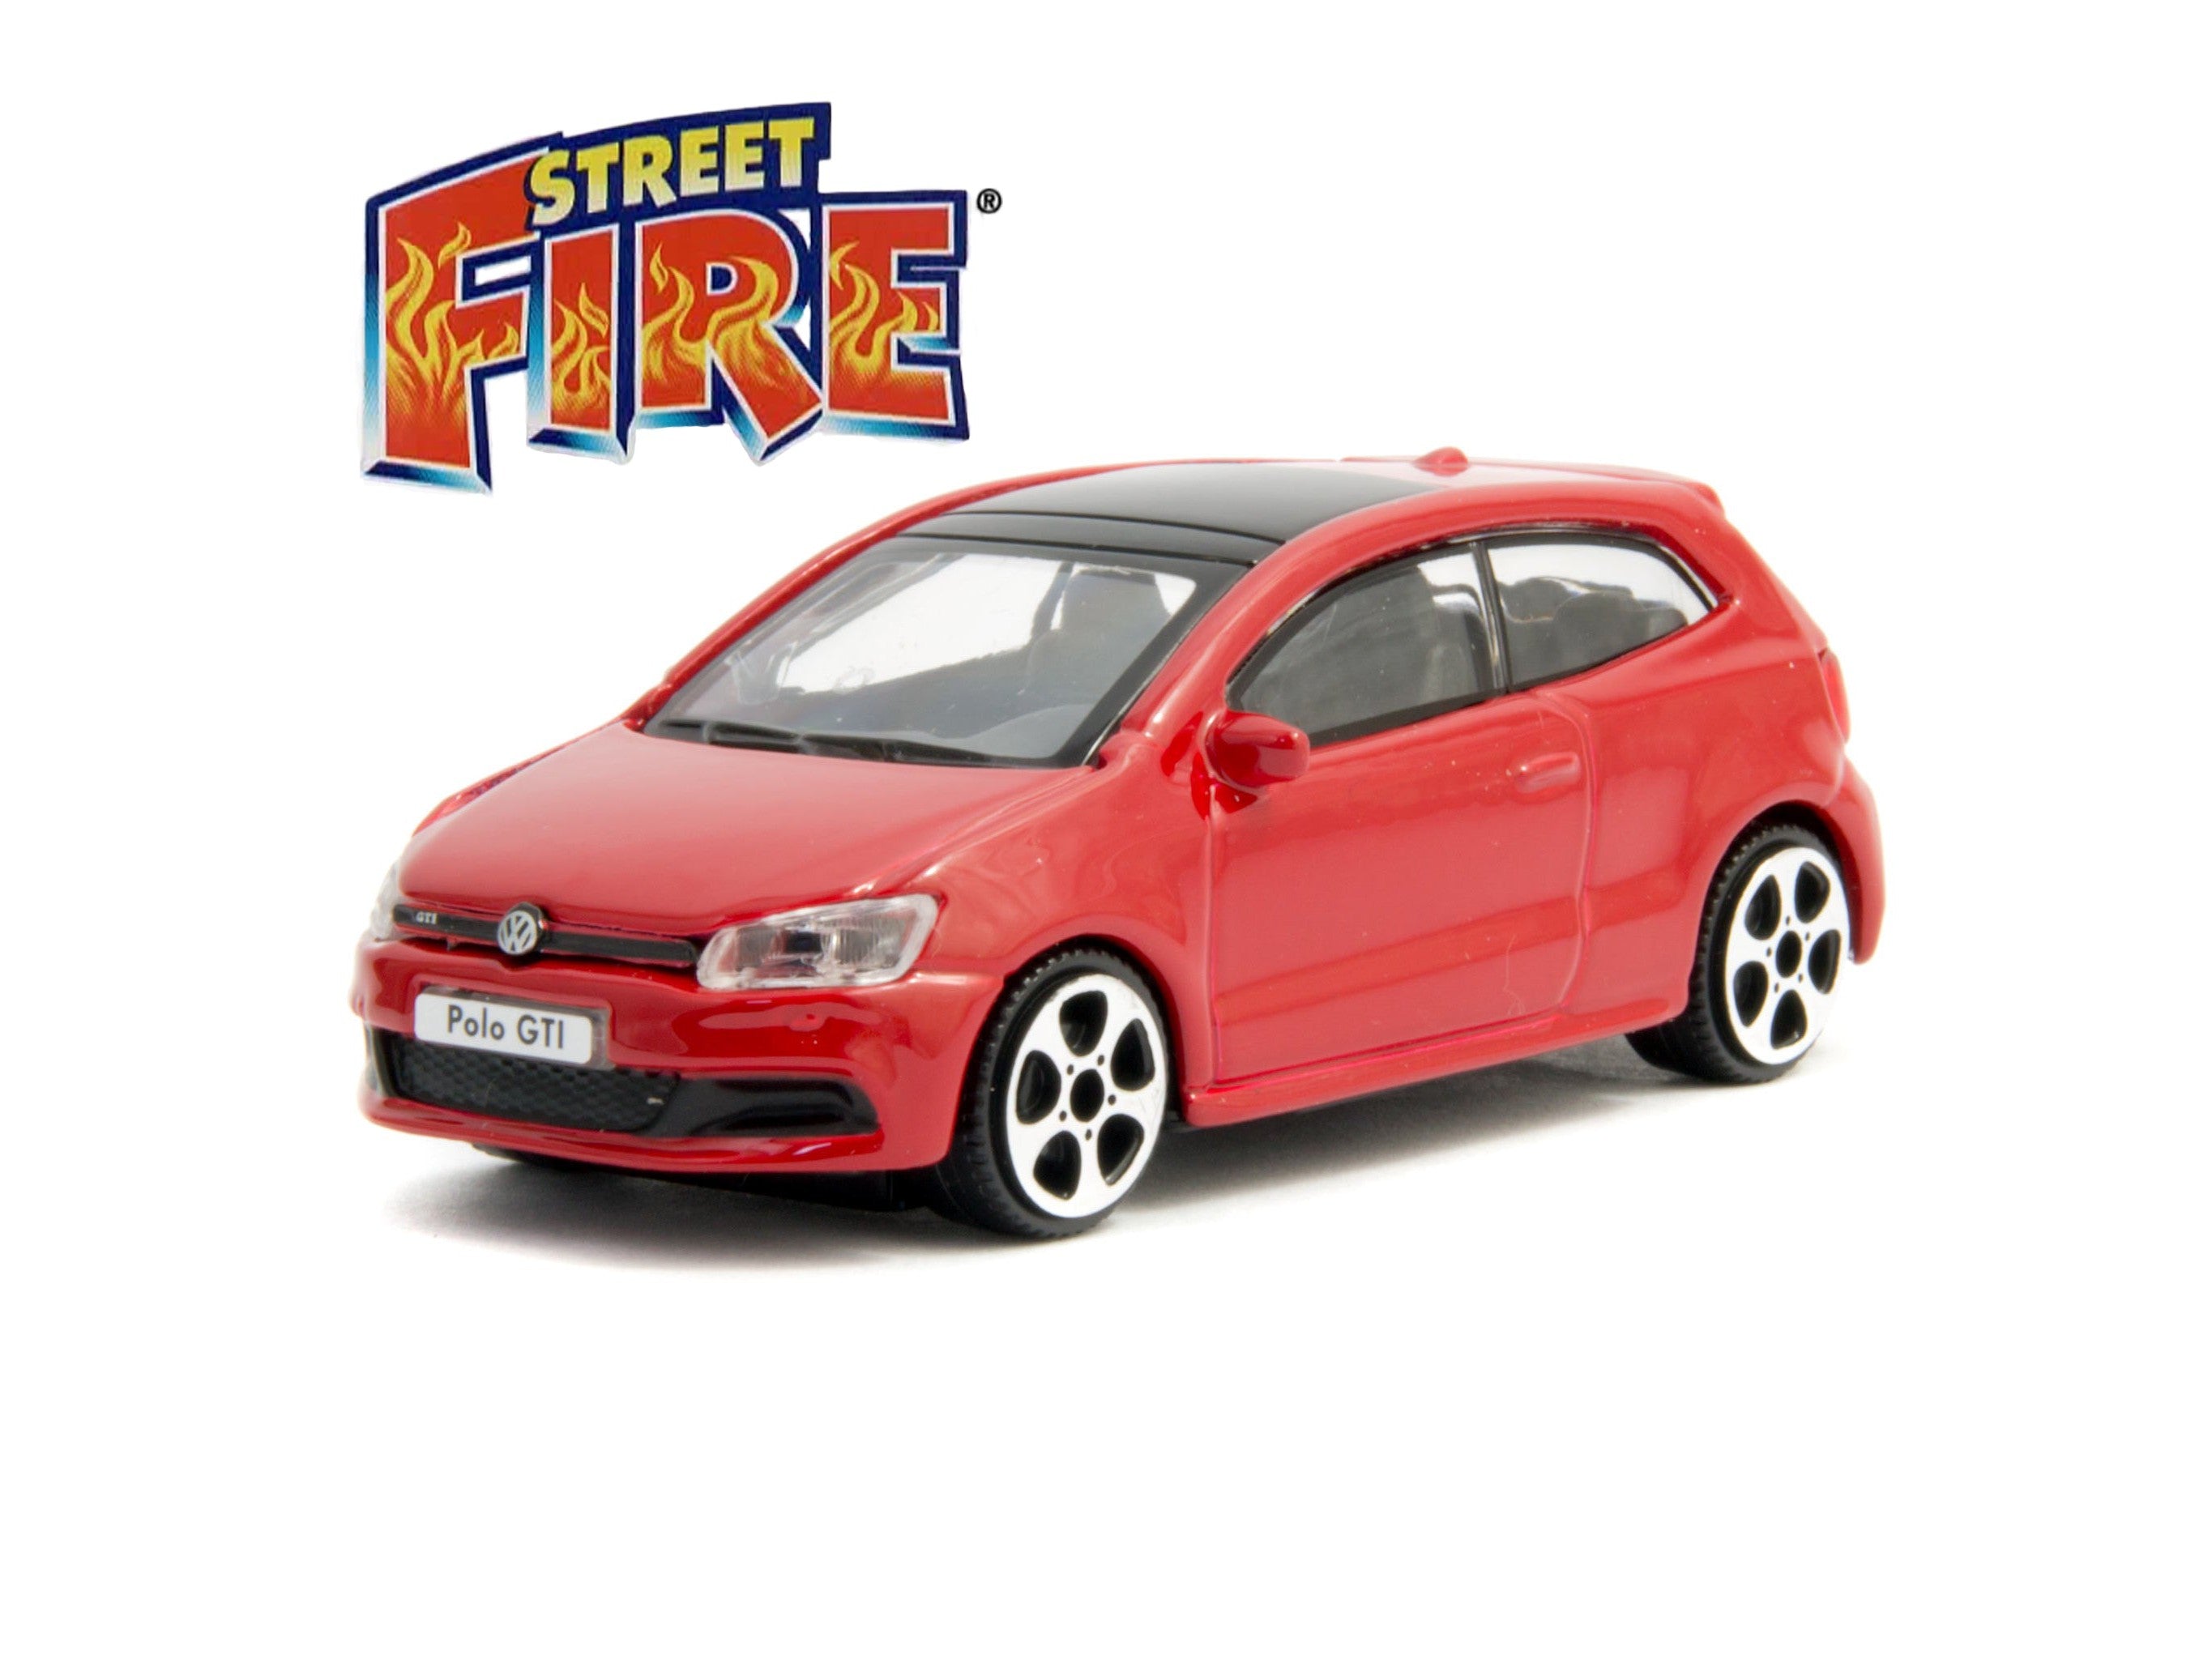 Volkswagen Polo GTi Mk5 Diecast Toy Car red - 1:43 Scale